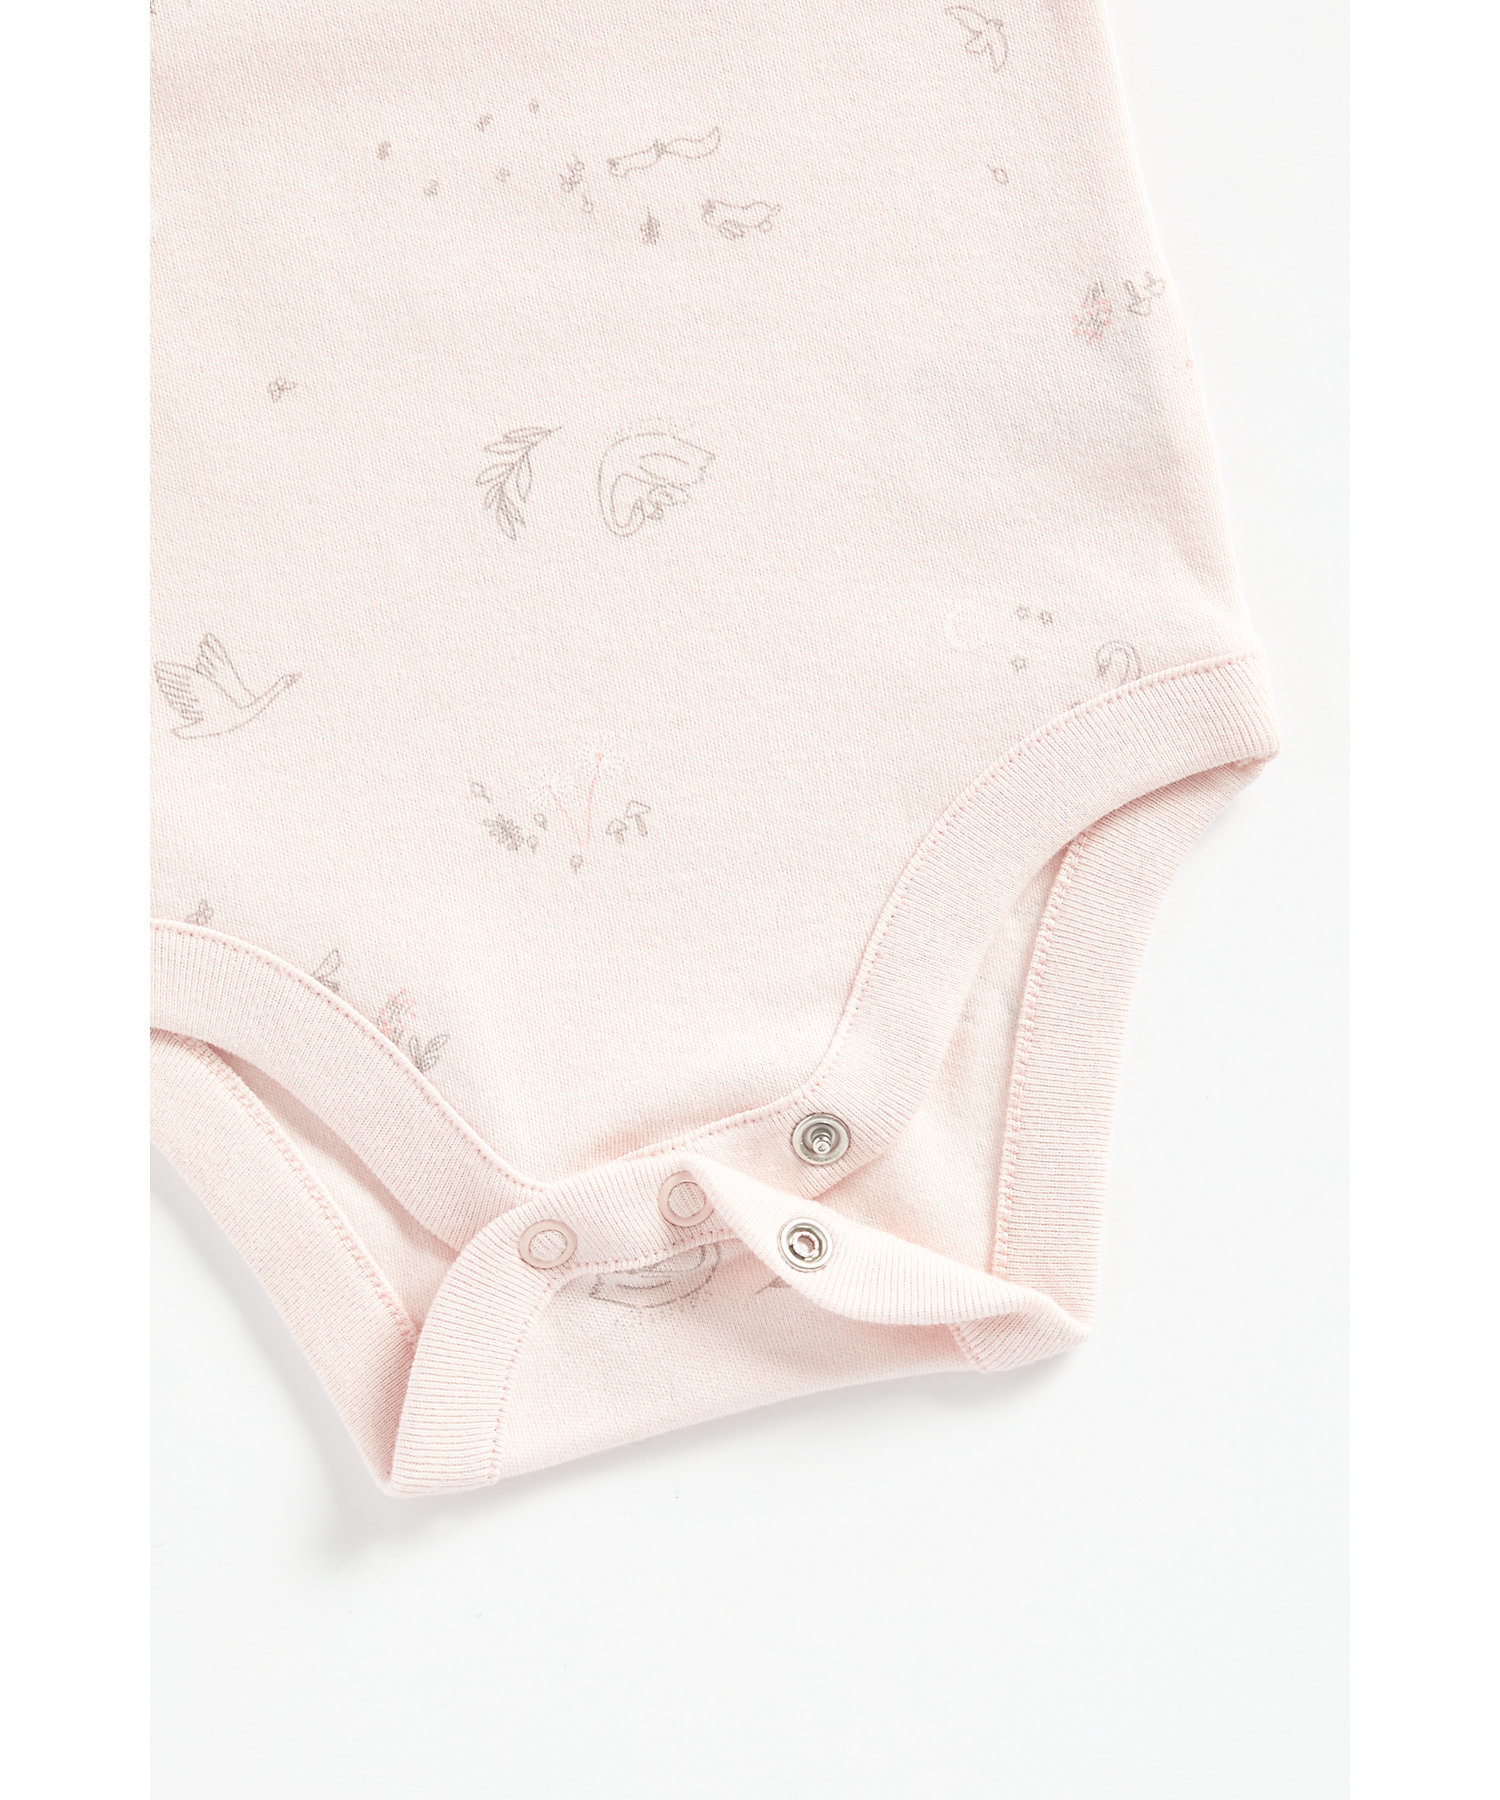 Mothercare | Girls Full Sleeves Bodysuit Swan Patchwork And Embroidery - Pack Of 2 - Pink 5